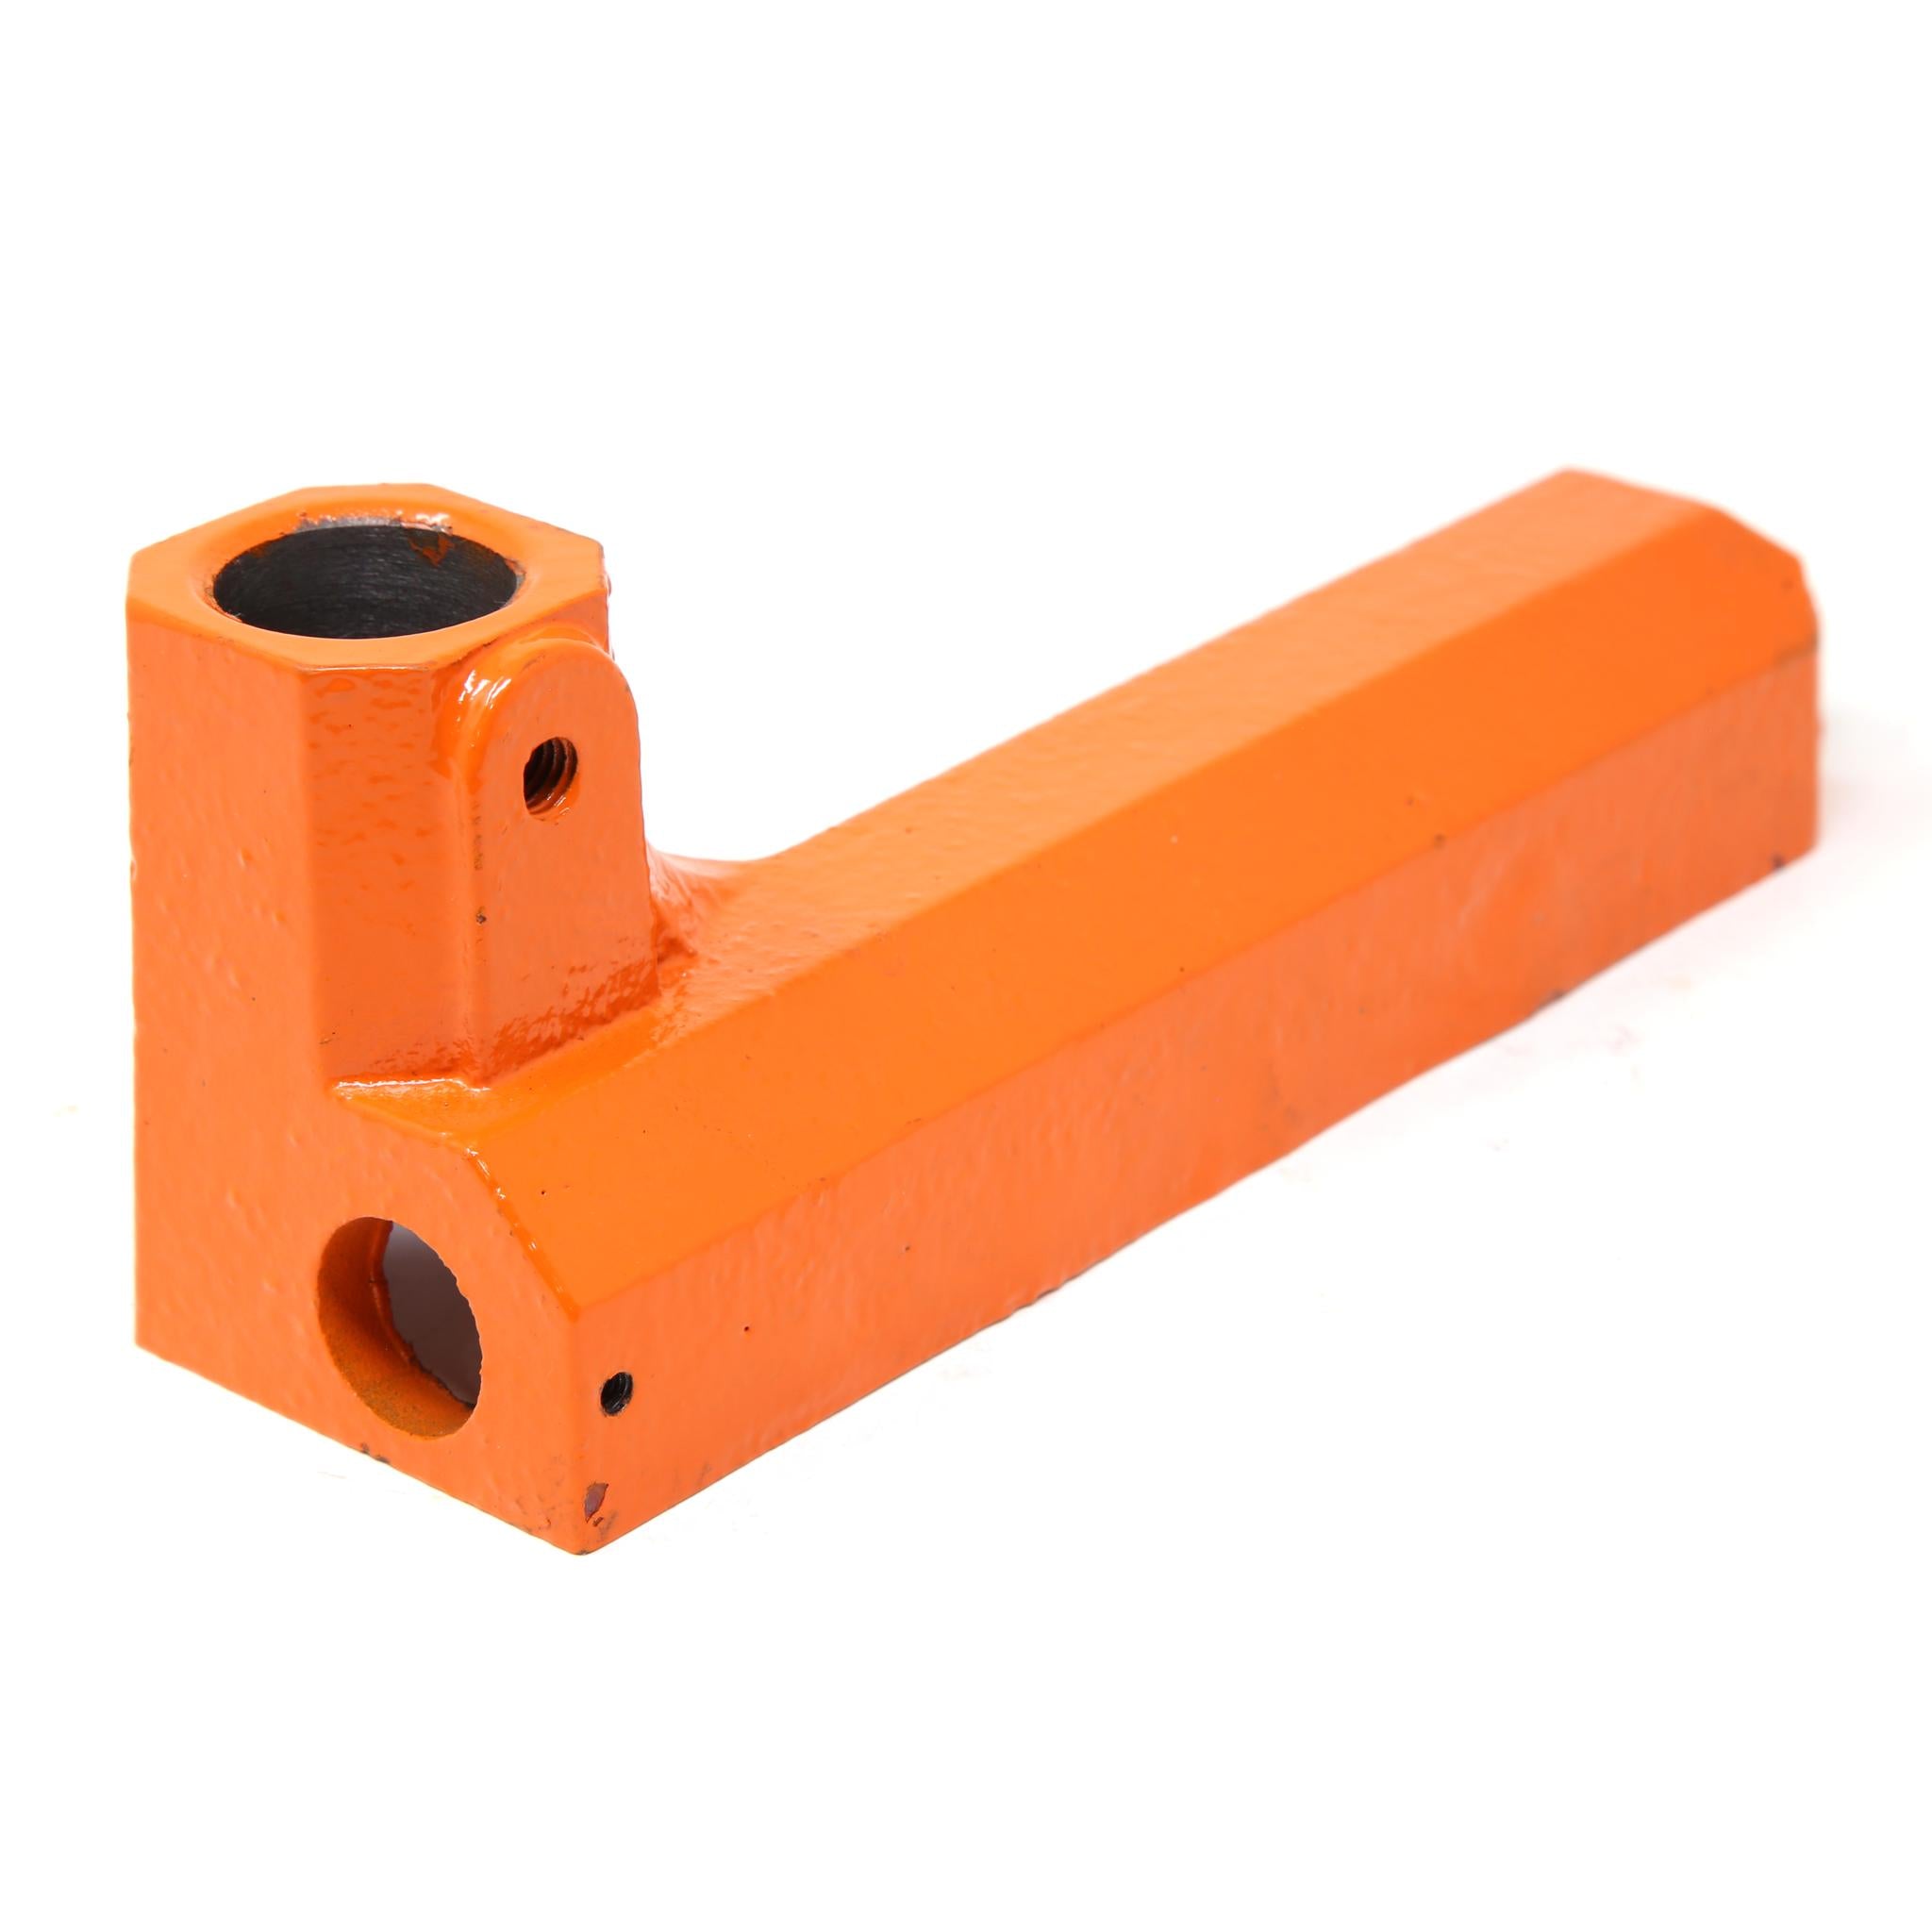 [3427-046] Tool Rest Base 1